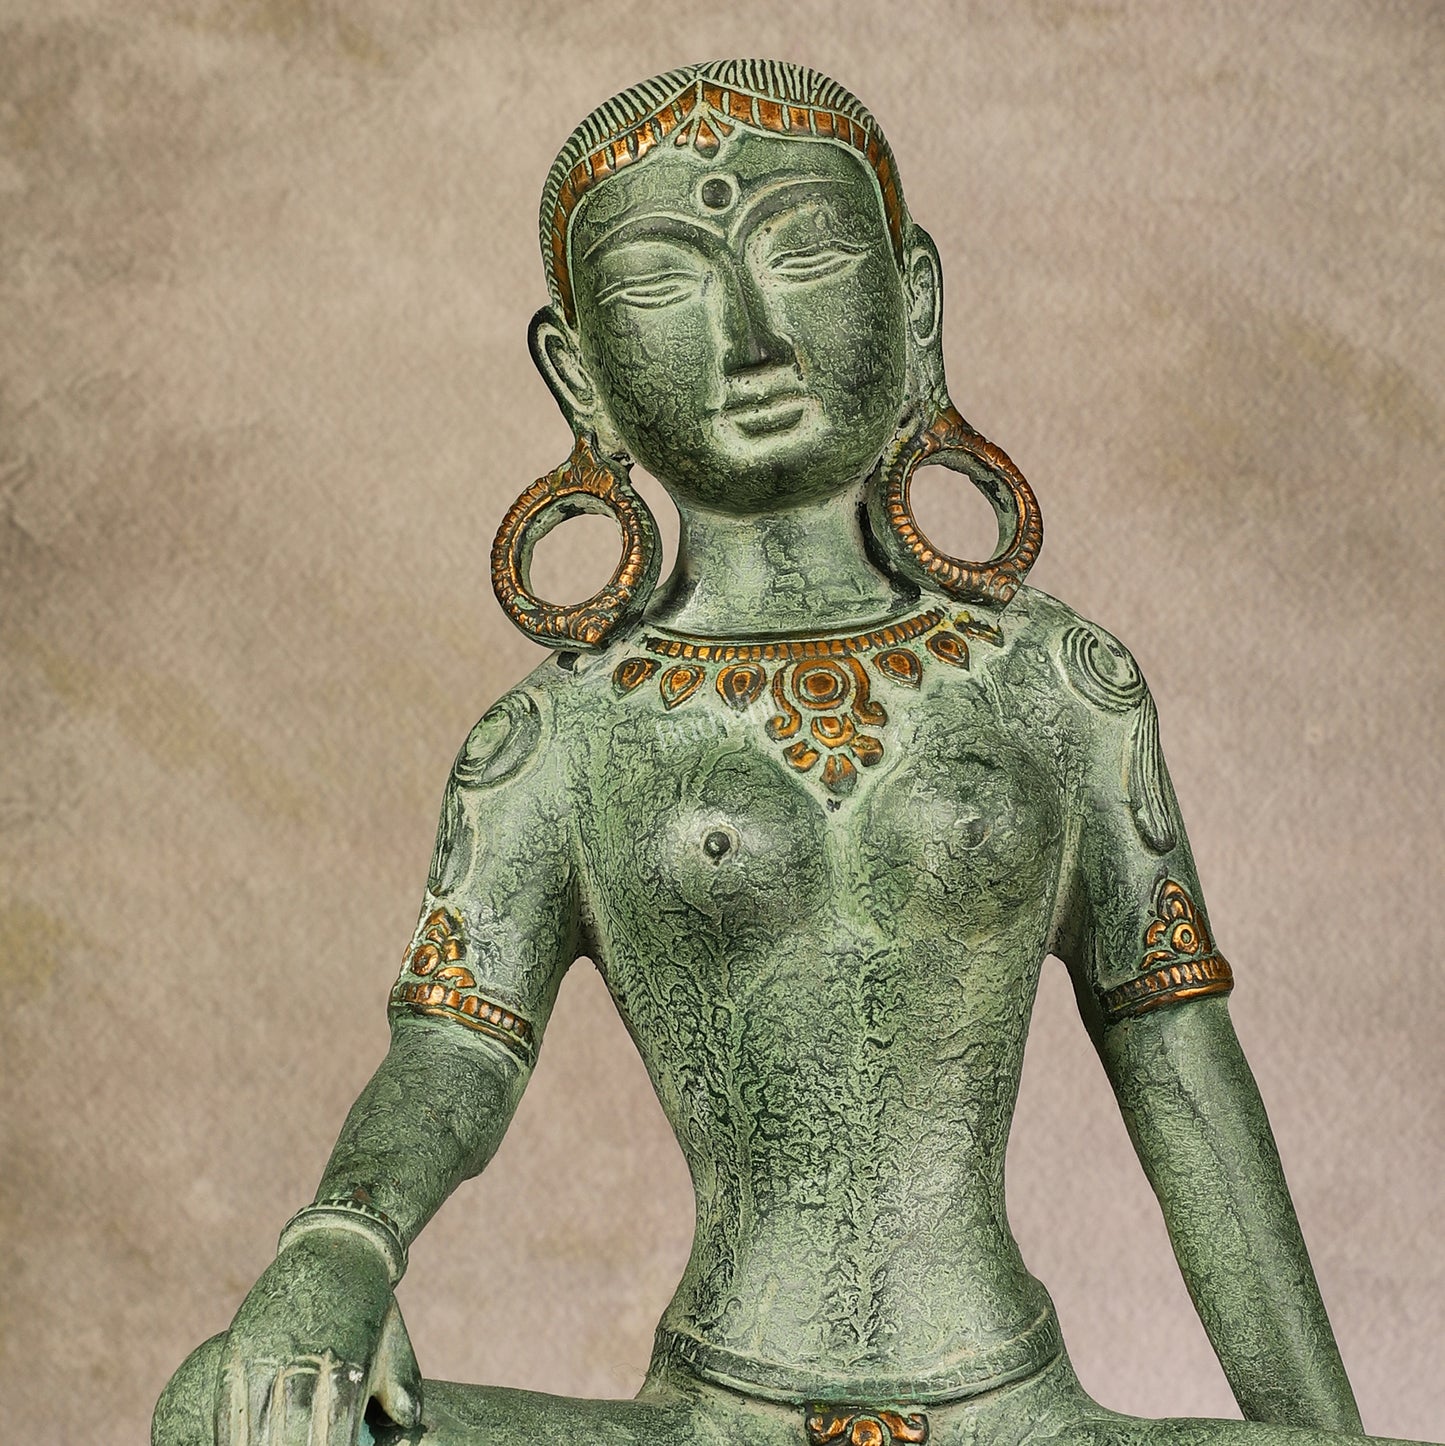 Brass Seated Nepalese Parvati Idol - Antique Patina Hues | 10.5 Inch